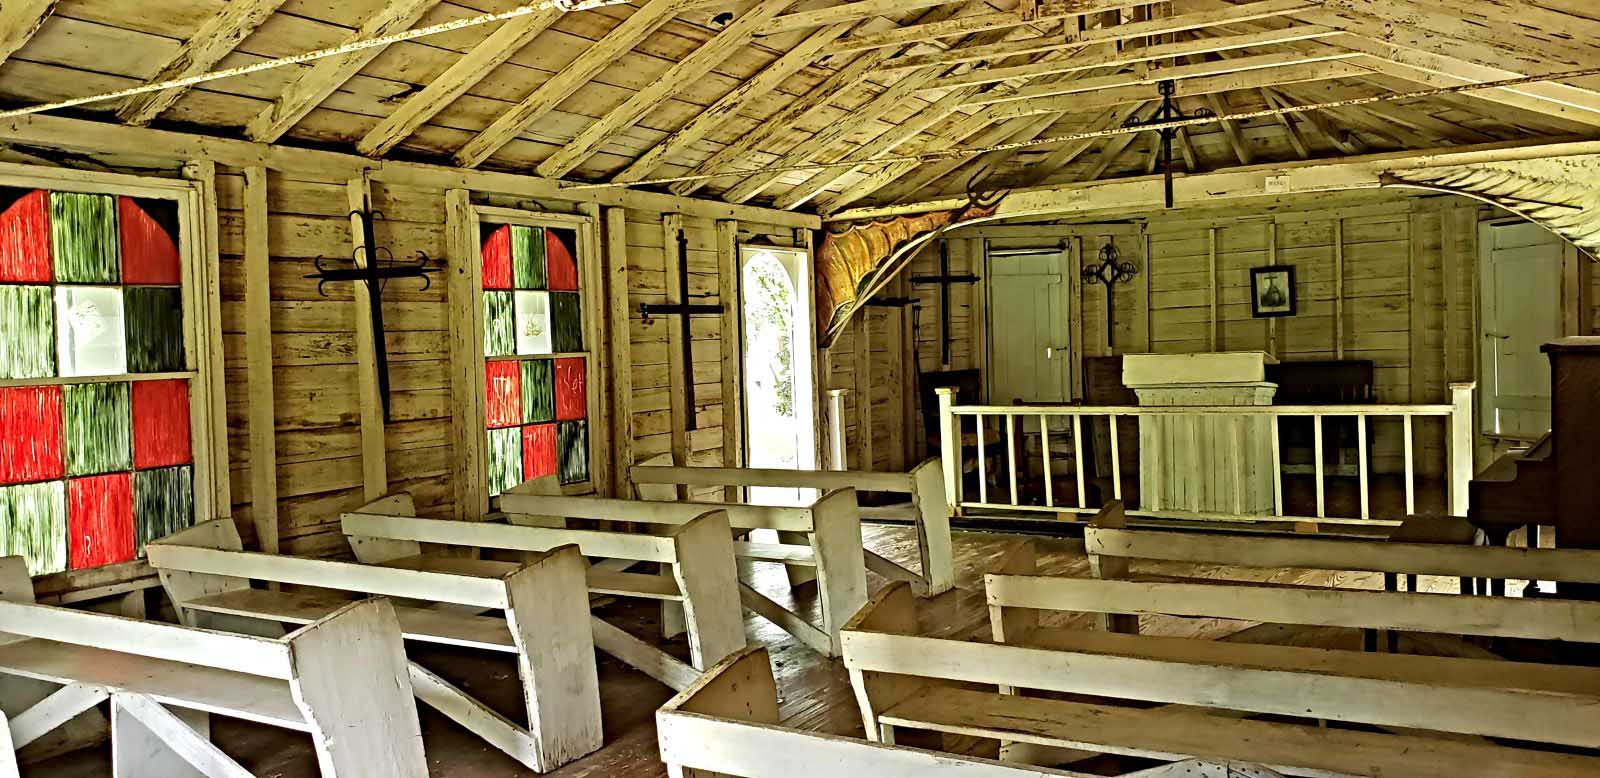 things to do in baton rouge lsu rural life museum church interior